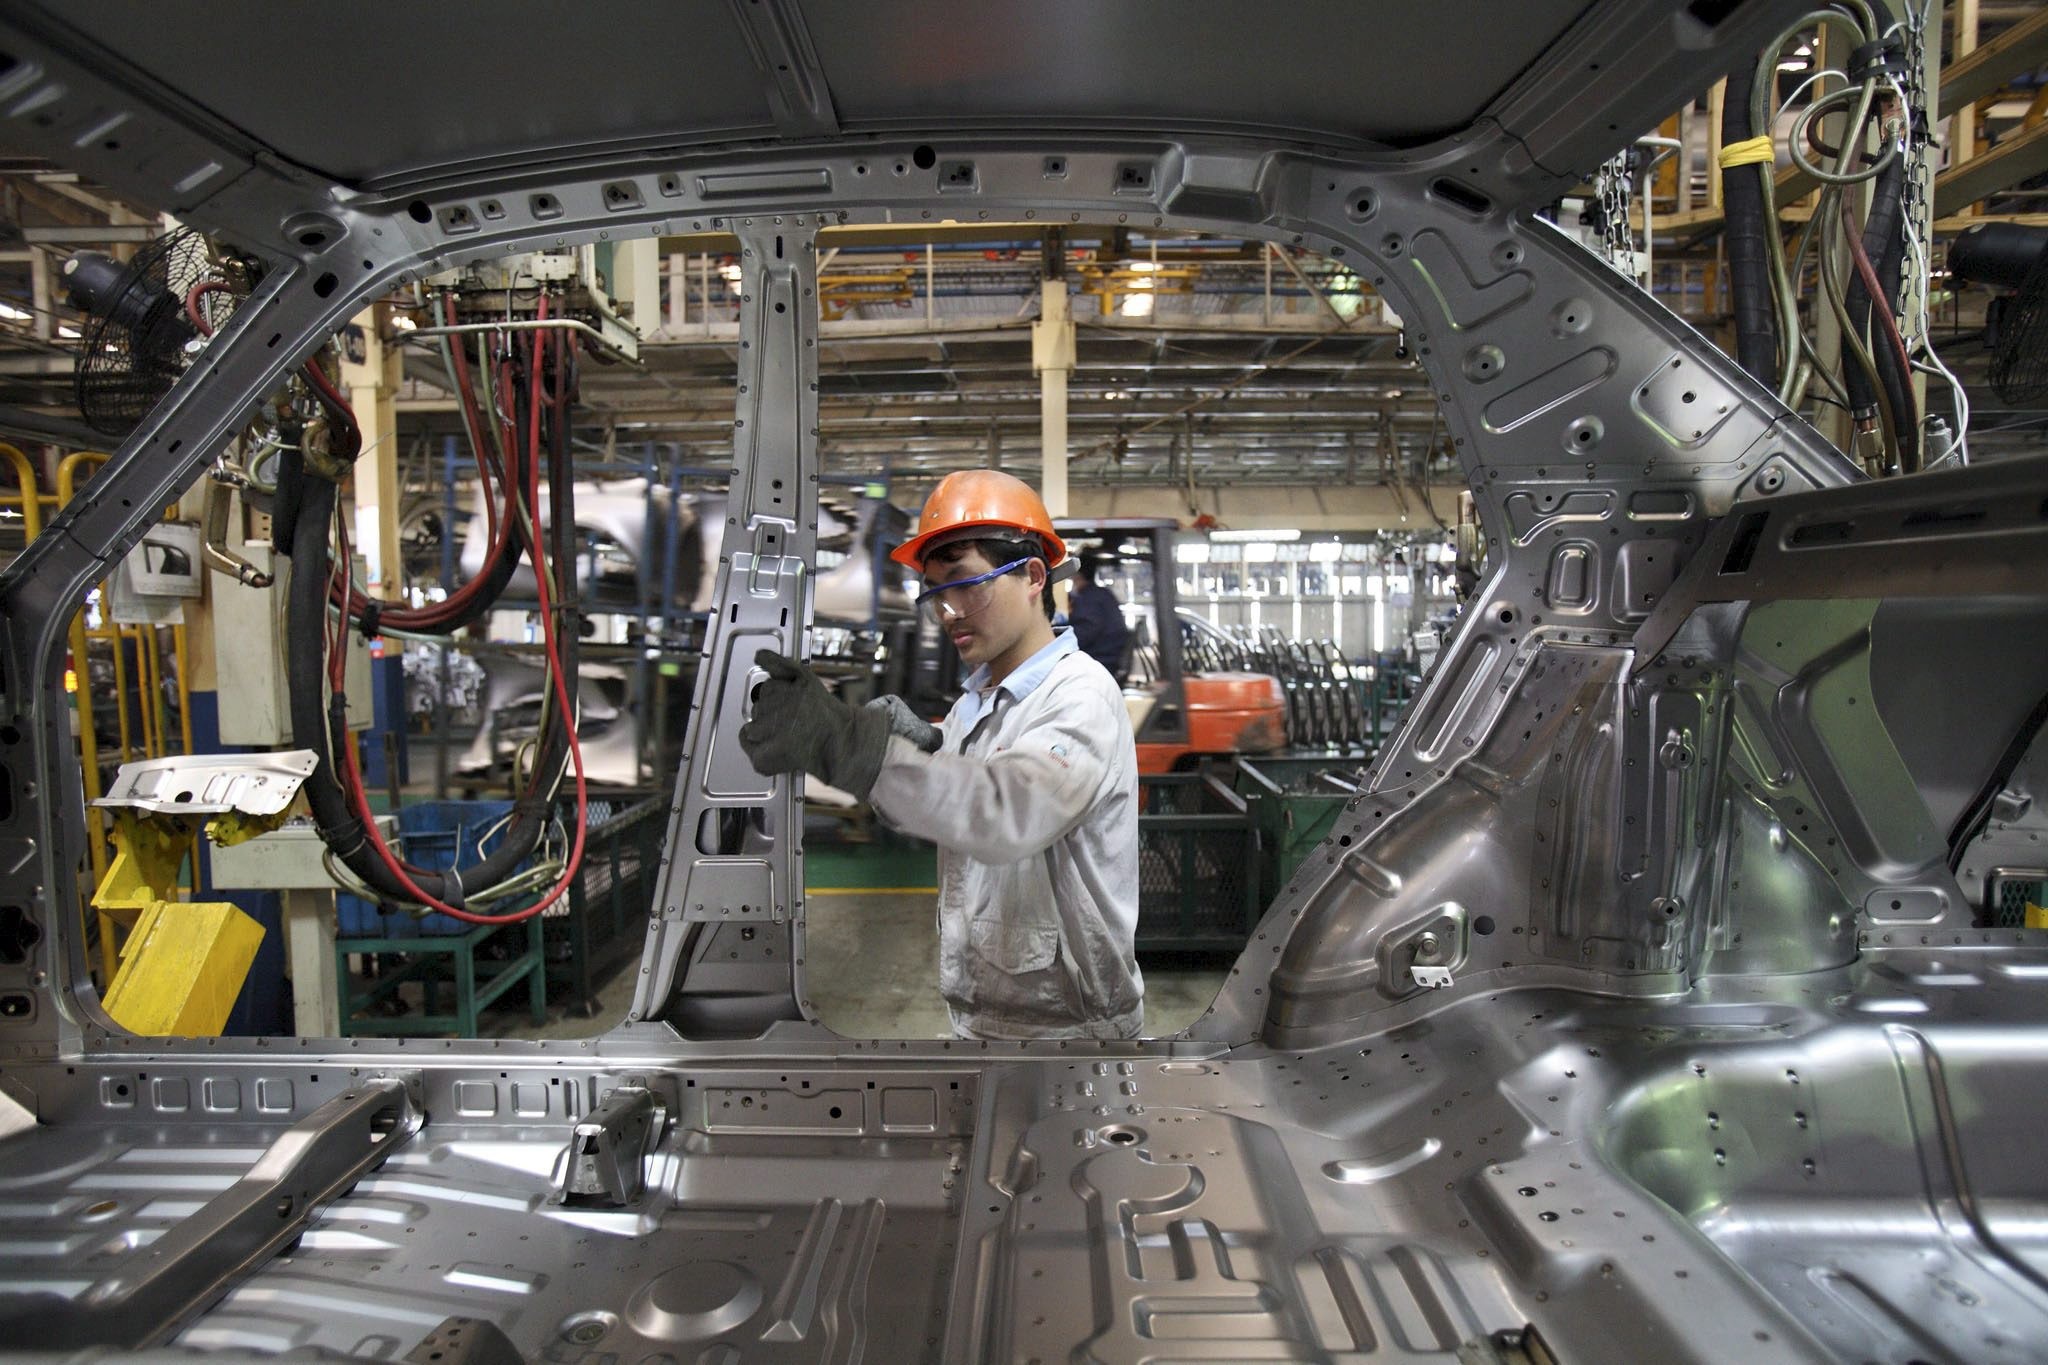 epa04337473 (FILE) A file photo dated 15 May 2009 showing workers assembling vehicles in a Geely Automobile factory in Ningbo, China. China's monthly index of manufacturing activity climbed 01 August 2014 to a 27-month high of 51.7 per cent in July, up from 51 per cent in June and suggesting stable growth in the world's second-largest economy. The rise in the purchasing managers' index reflected the success of government policies to stabilize growth and an 'improving external environment, which helped boost production and new orders,' said Zhao Qinghe, an economist with the National Bureau of Statistics. The similar Markit/HSBC Purchasing Managers' Index, which more closely tracks private sector manufacturing, rose to an 18-month high of 51.7 in July. The 50-per-cent mark denotes the divide between expansion and contraction of purchasing orders. China's annual economic growth slumped to 7.7 per cent in the last two years, the slowest since 1999, and is not expected to increase this yea